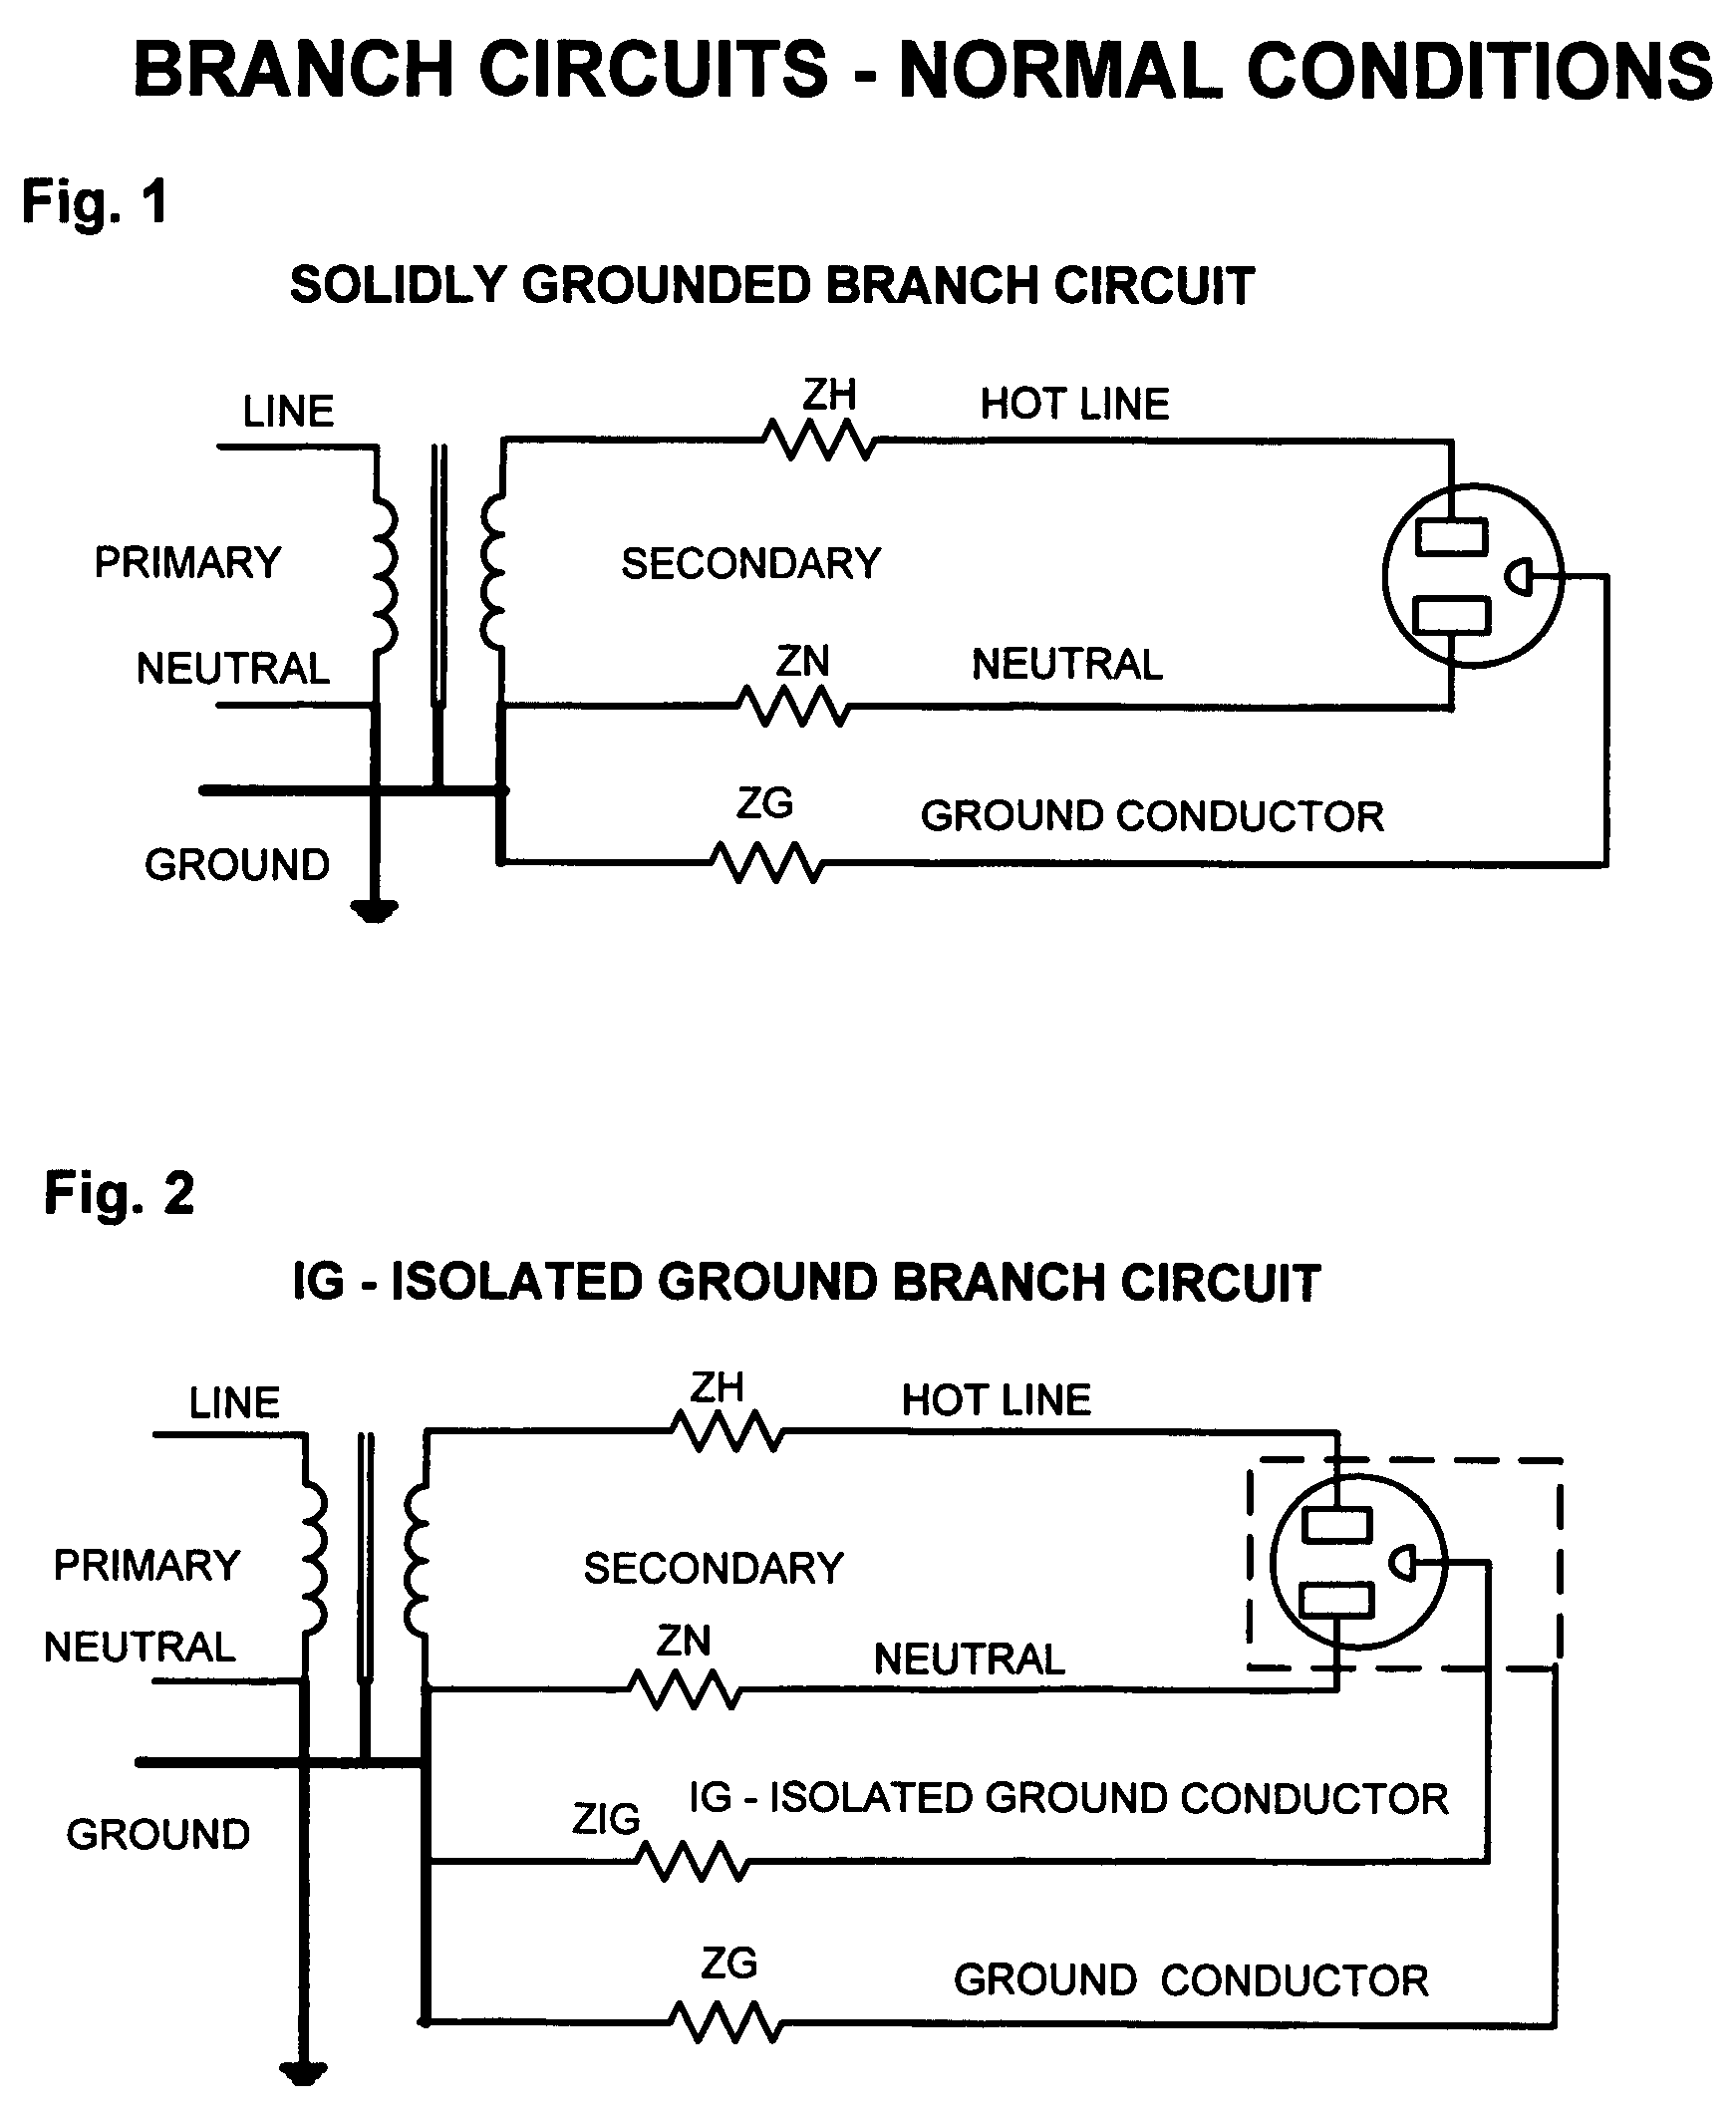 Method for detecting electrical ground faults